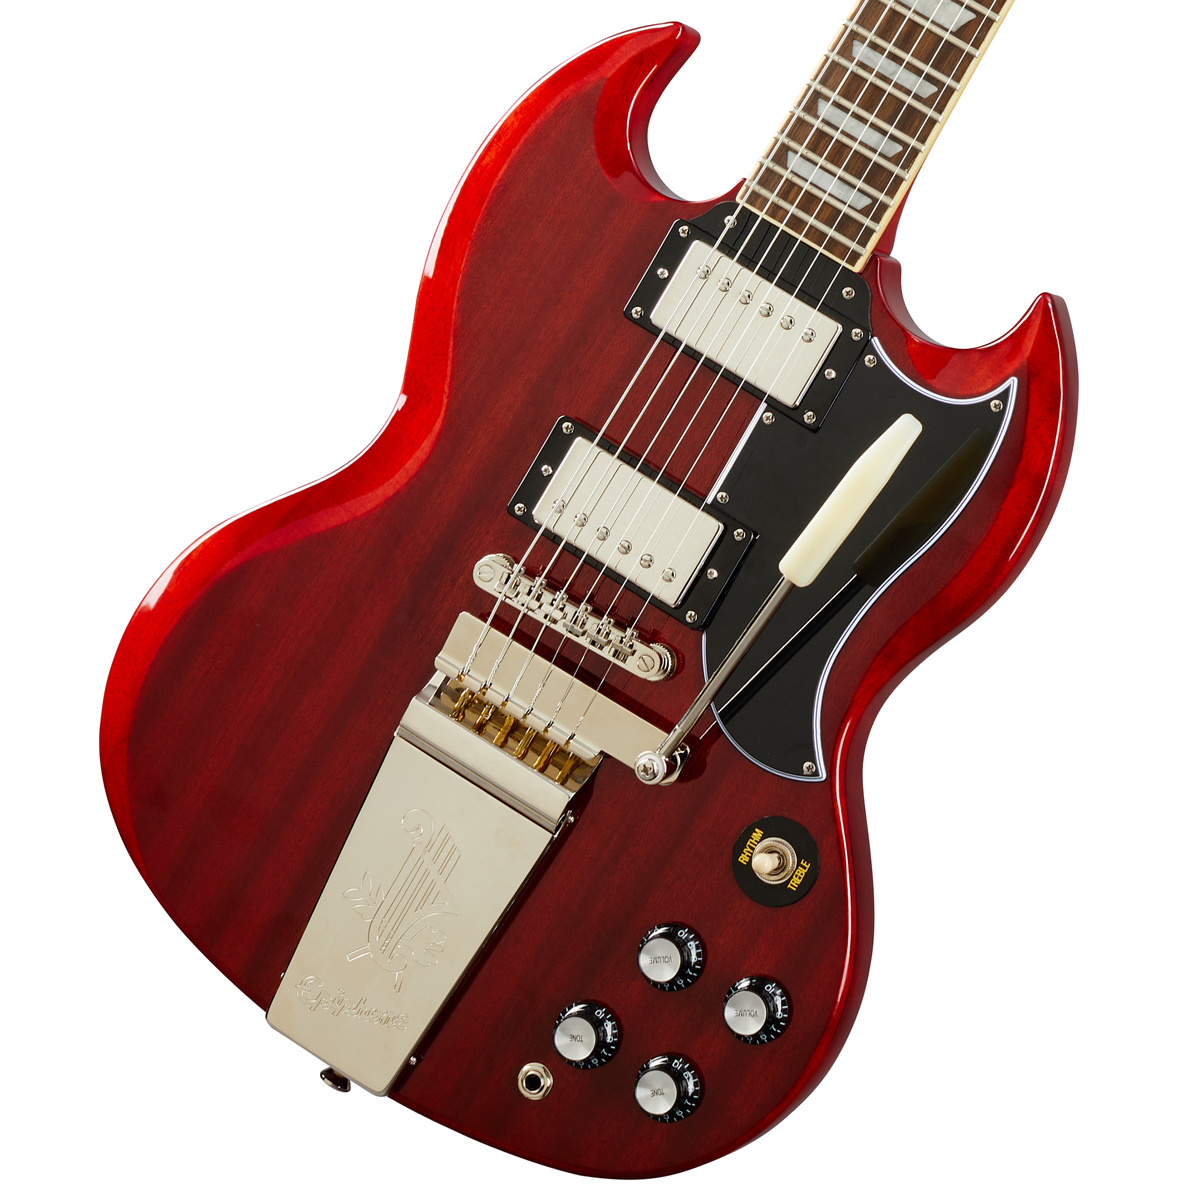 Epiphone by Gibson / Inspired by Gibson SG Standard 60s Maestro Vibrola  Vintage Cherry エピフォン エレキギター